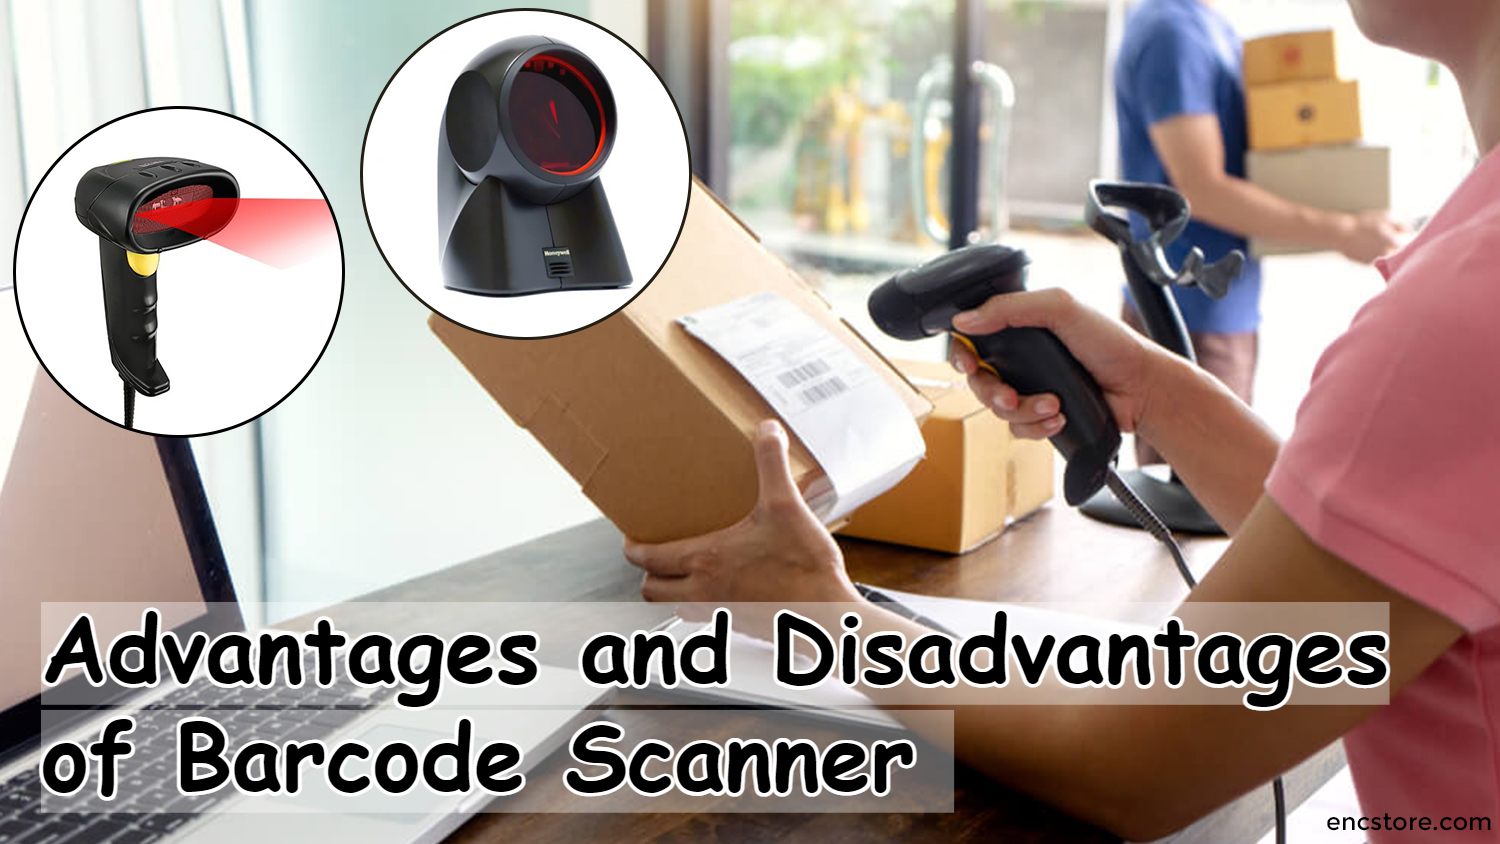 Advantages and Disadvantages of Barcode Scanner